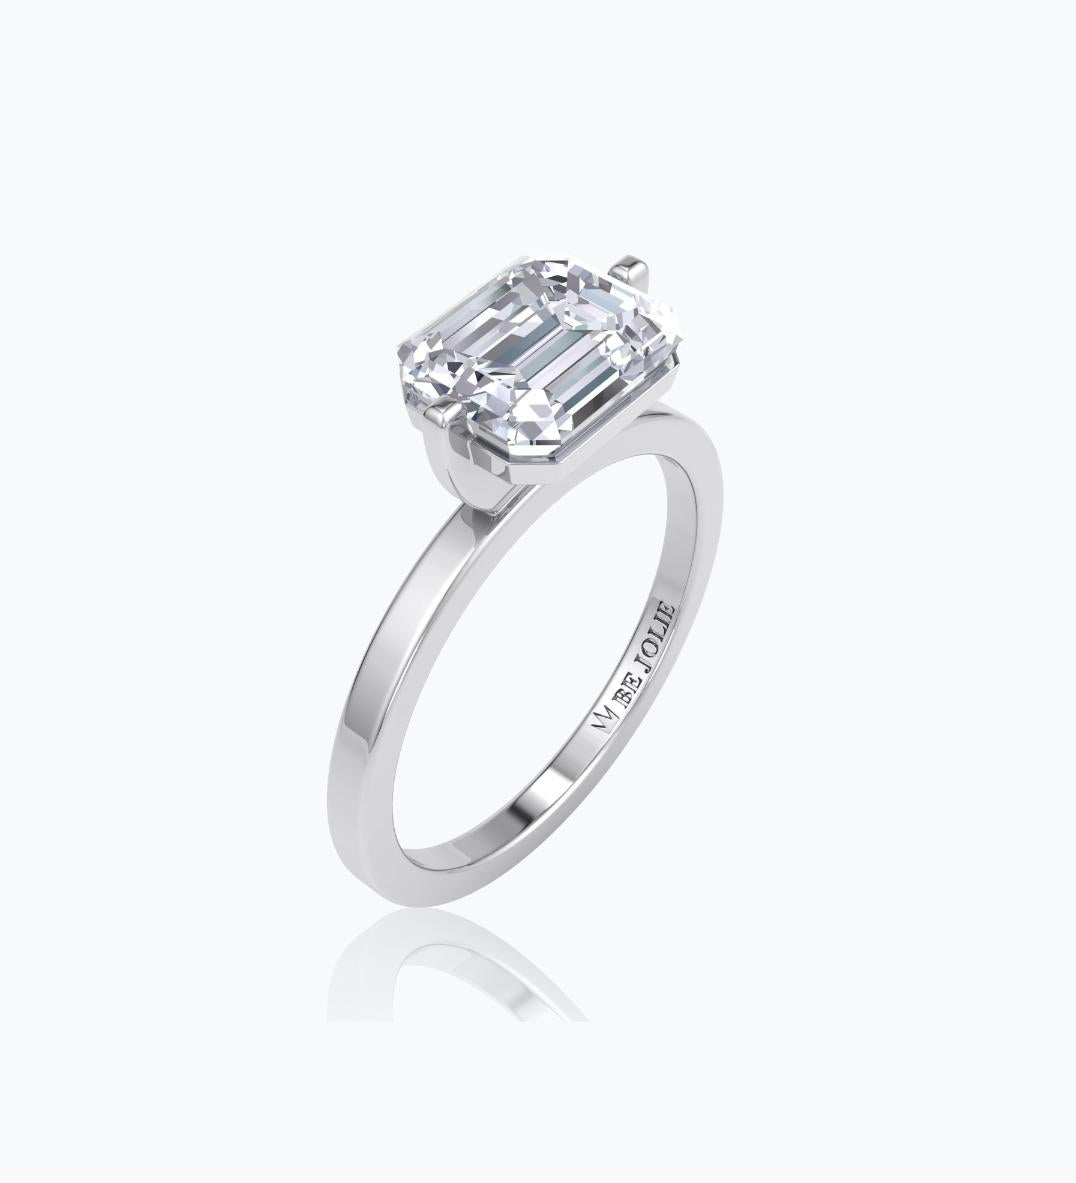 Handcrafted Solitaire Engagement Ring centers a 2.01 Carat Emerald cut diamond  G-H / VS22 and mounted on 18K White Gold. 
Ring Size 6.5 and can be resized. 
Our ring is custom made. Since beautiful jewels takes time to create, our lead time may